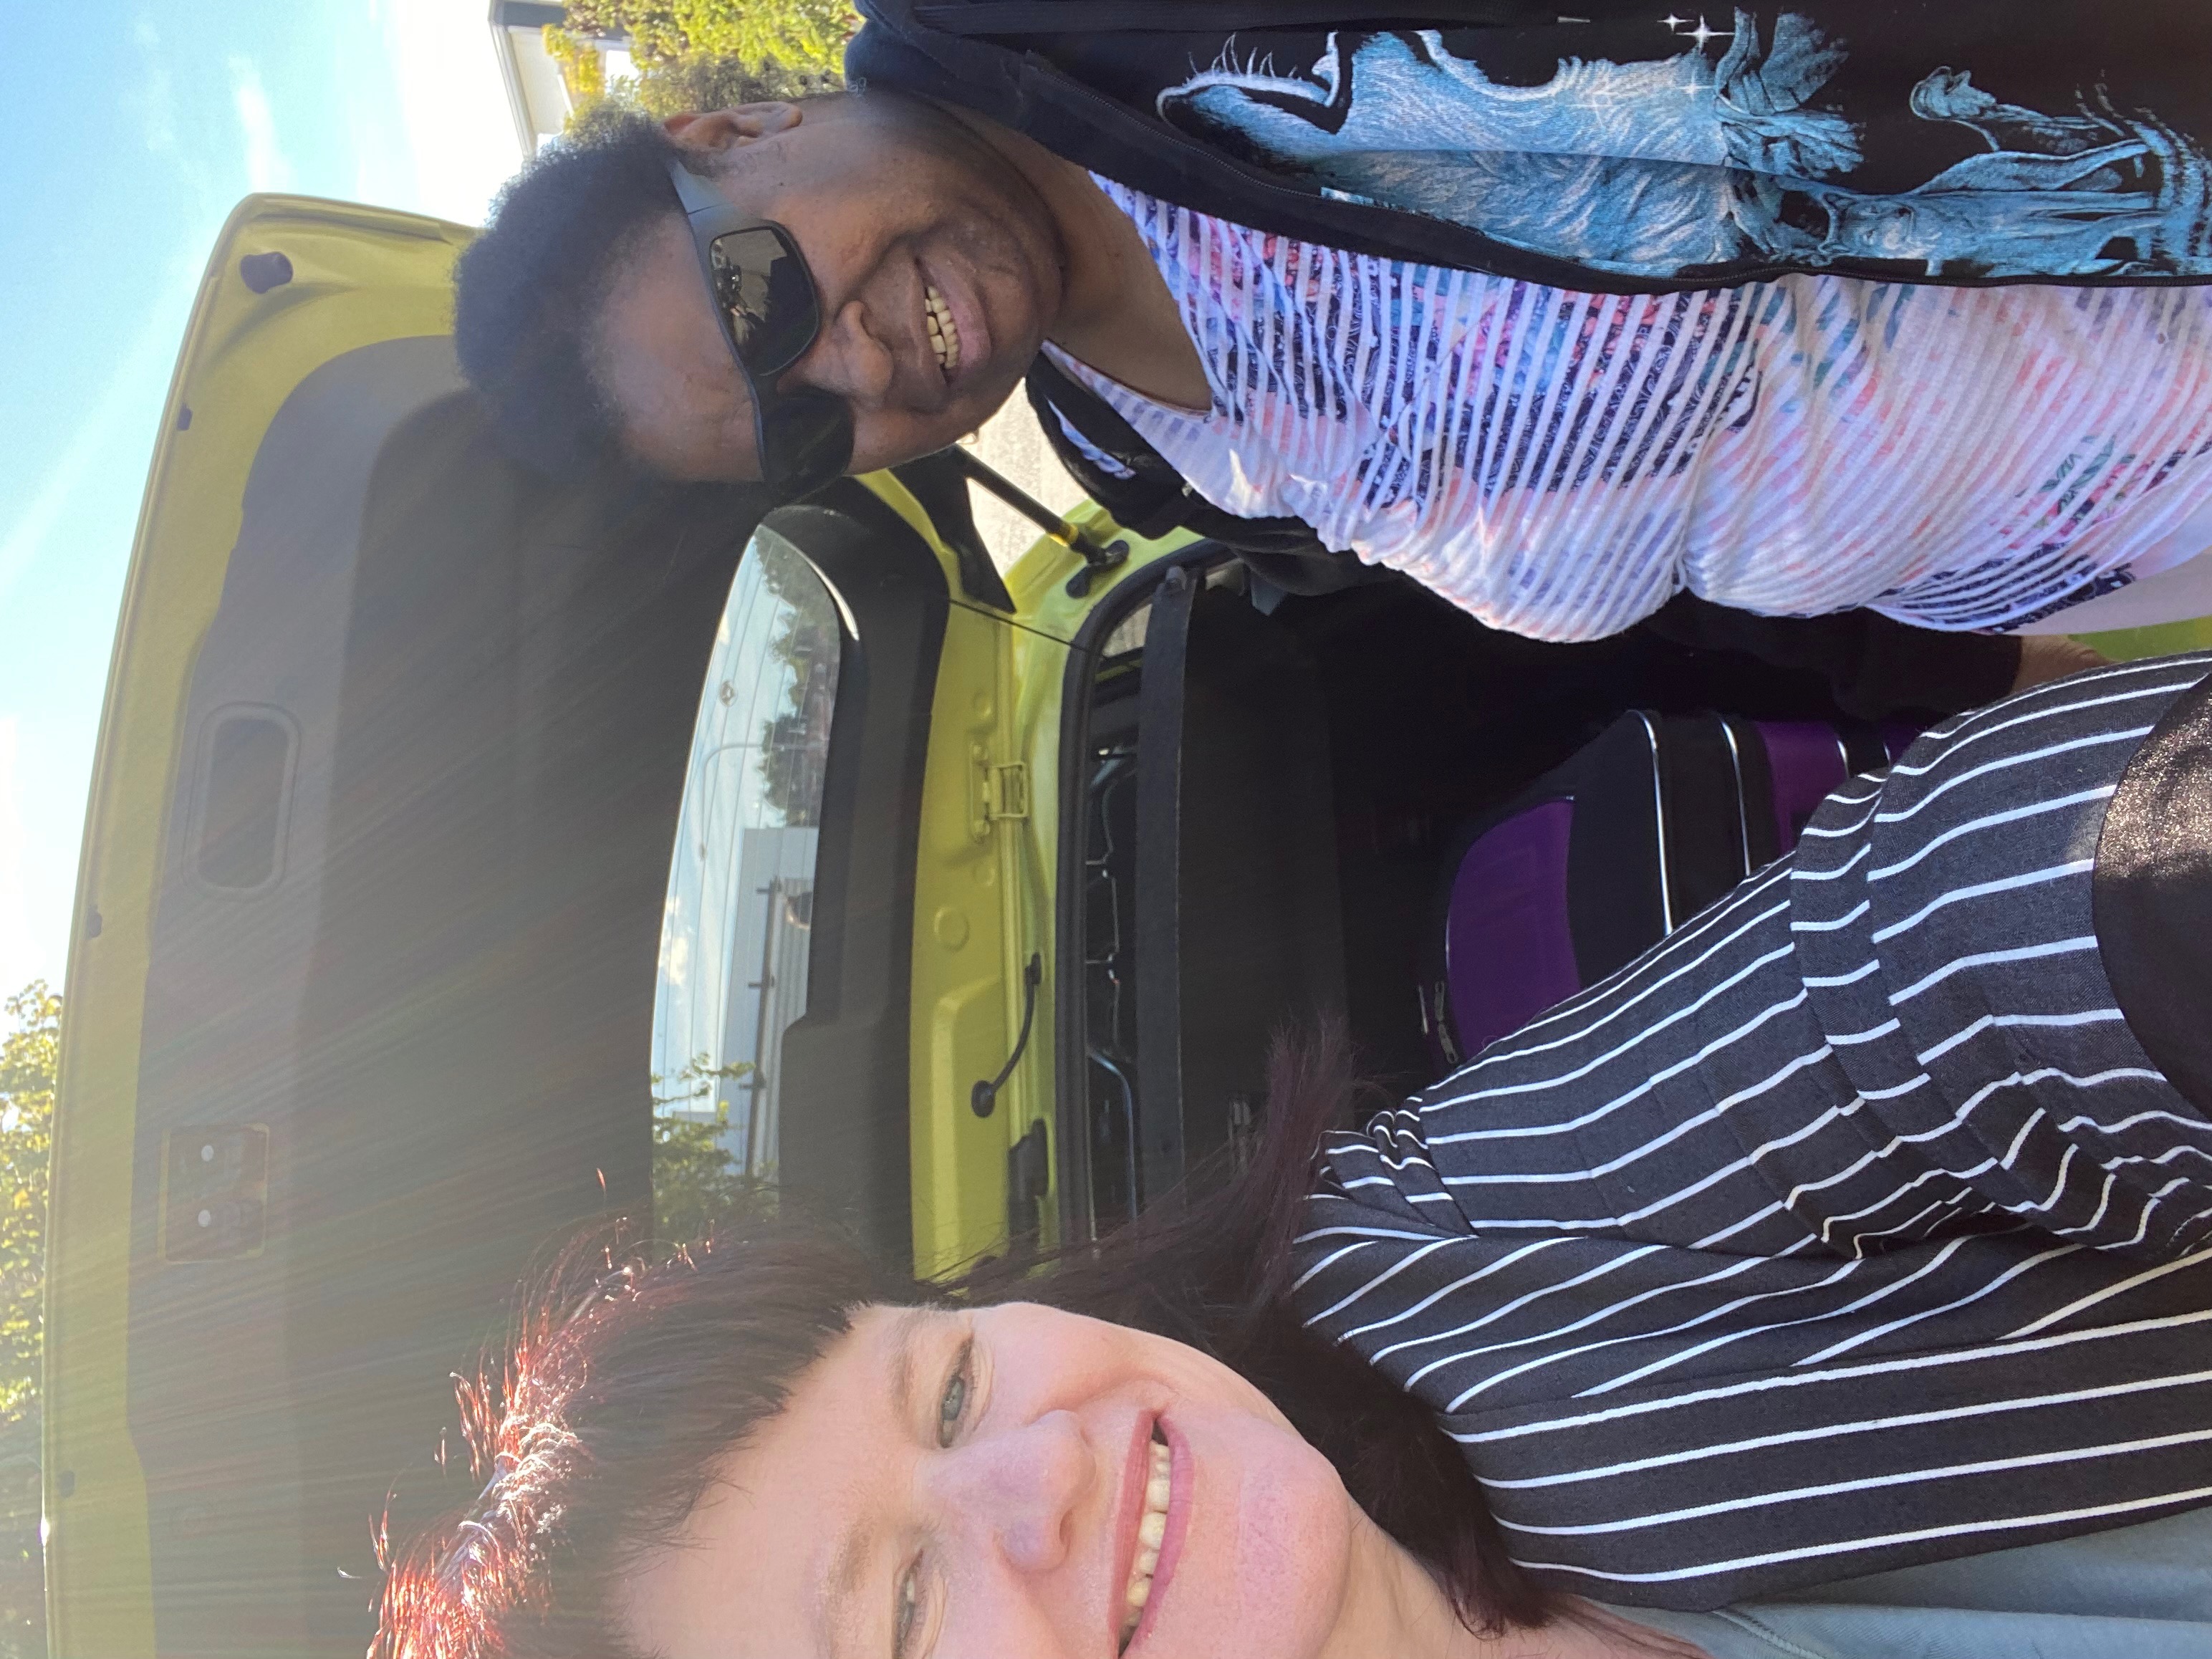 Taum and her support worker standing in front of the open boot of a yellow car